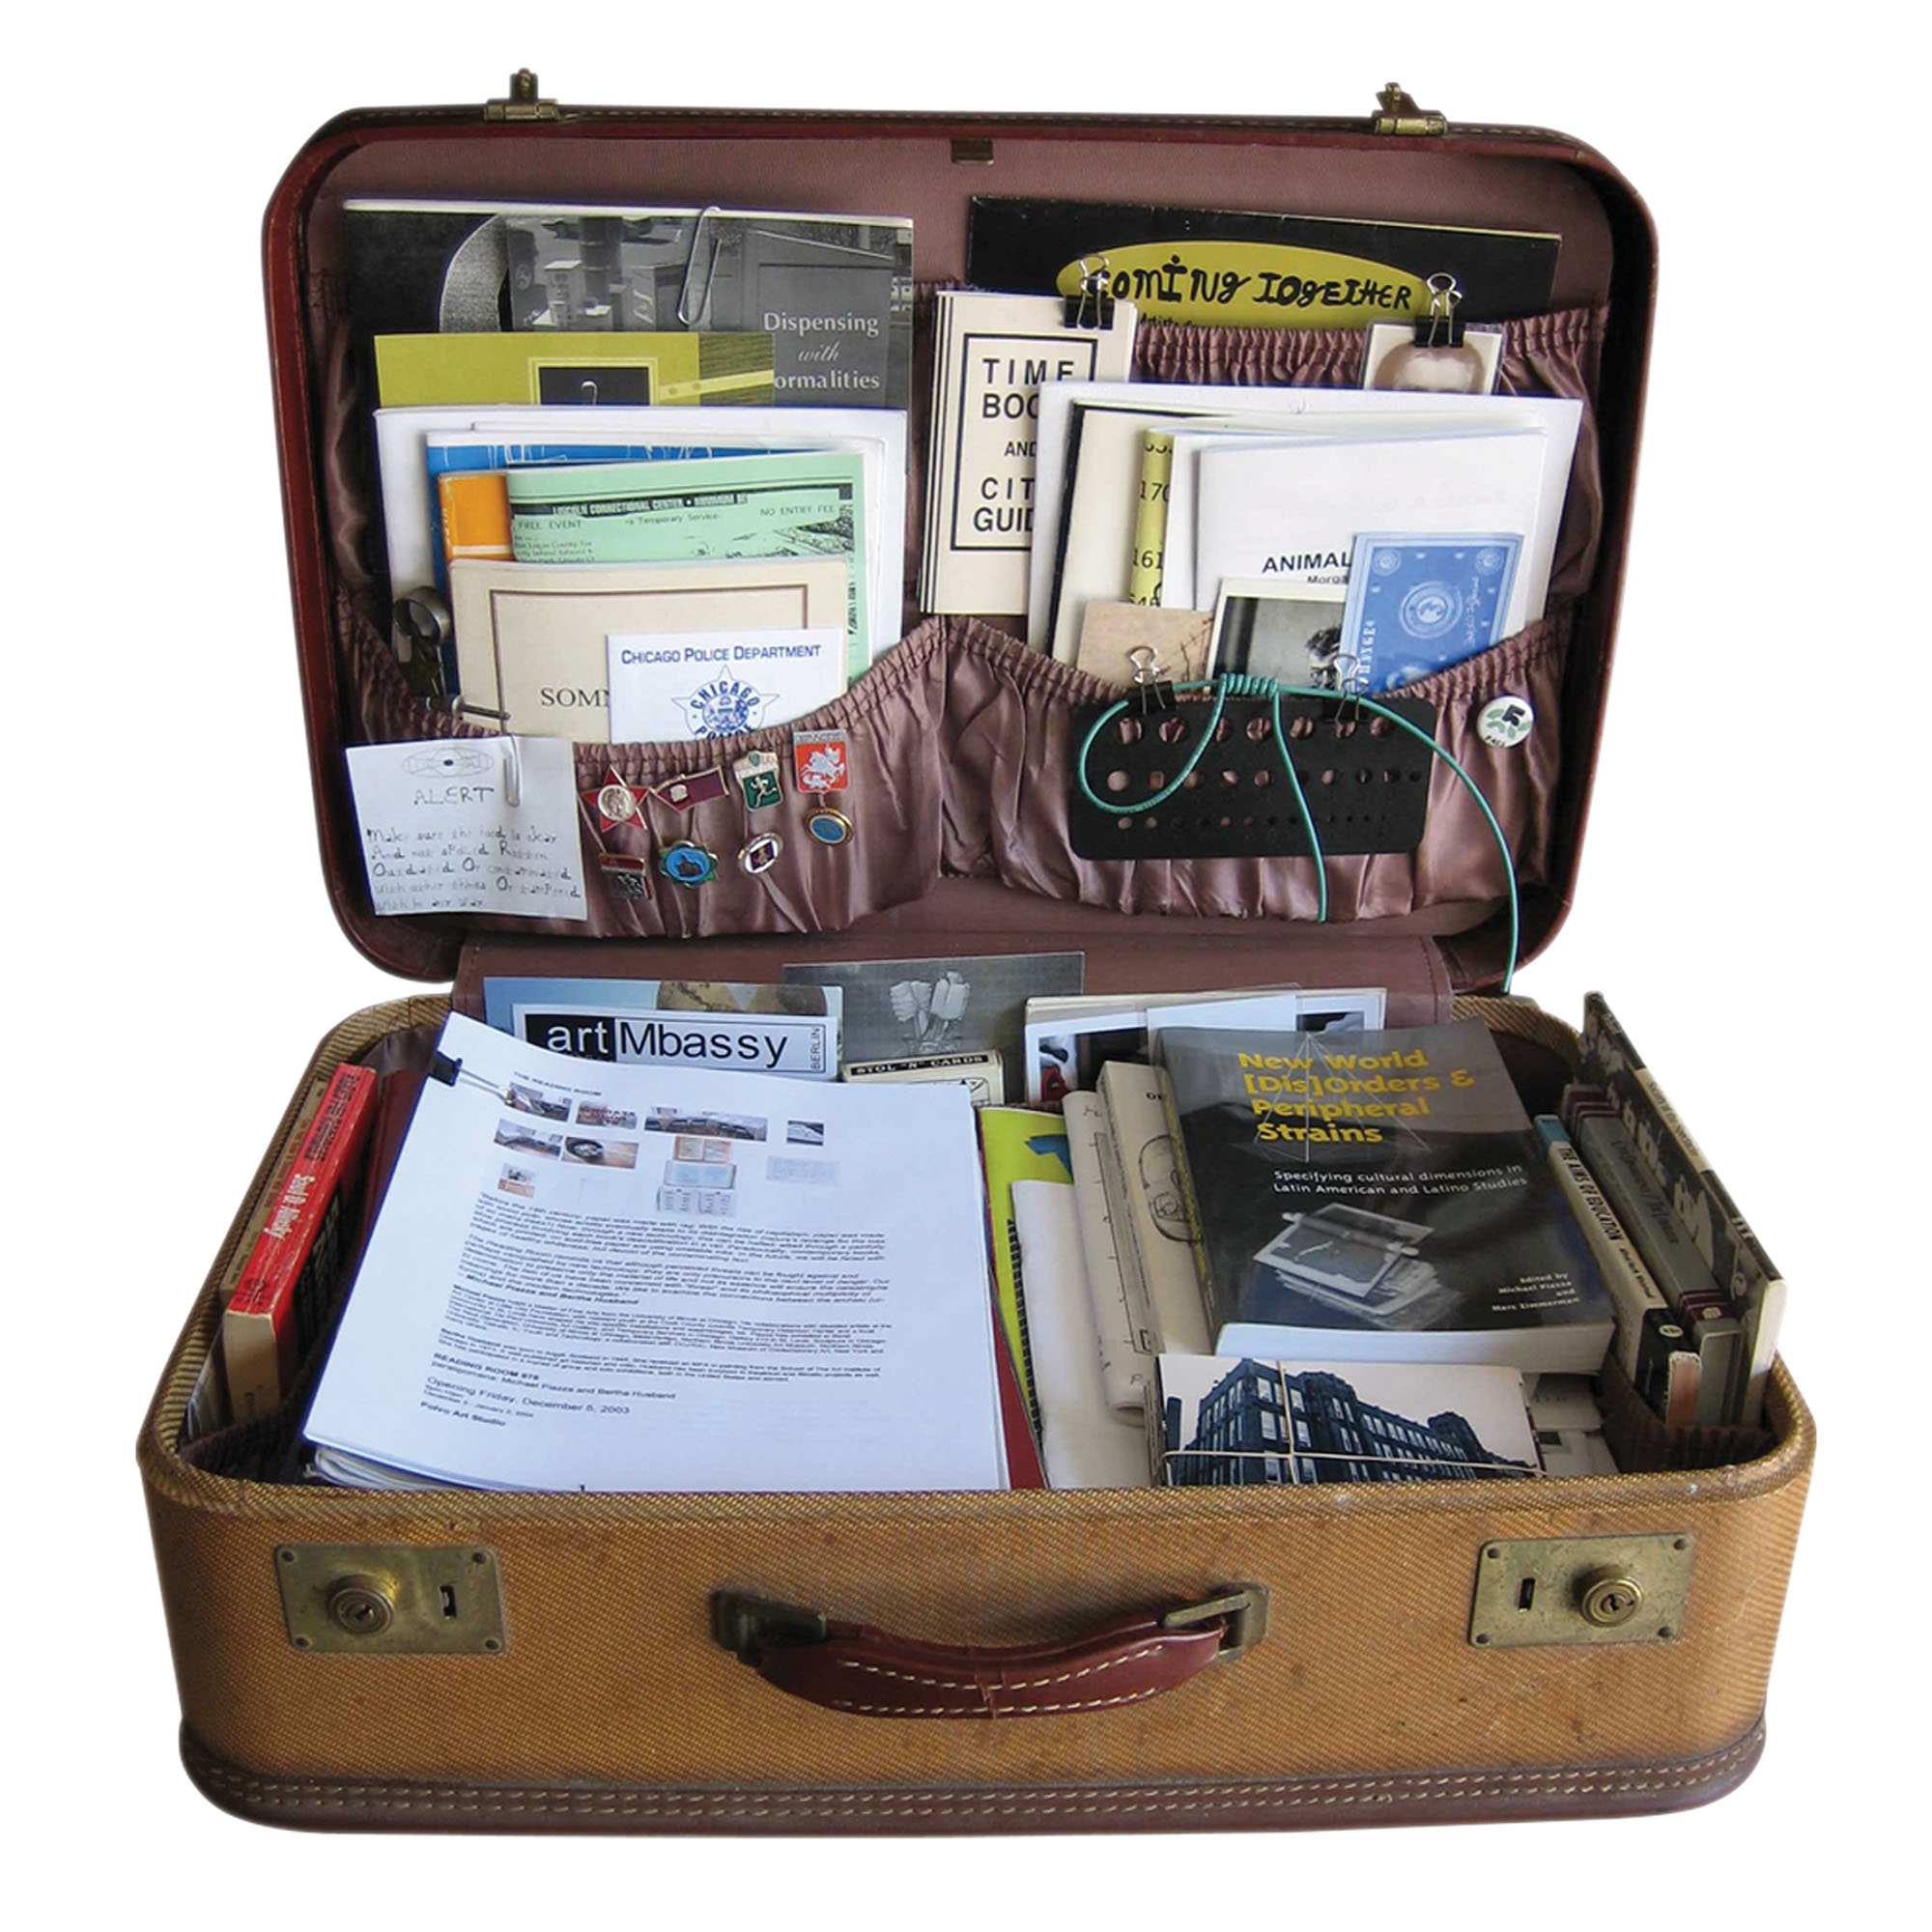 An old suitcase filled with books, zines, handwritten notes, and other printed ephemera